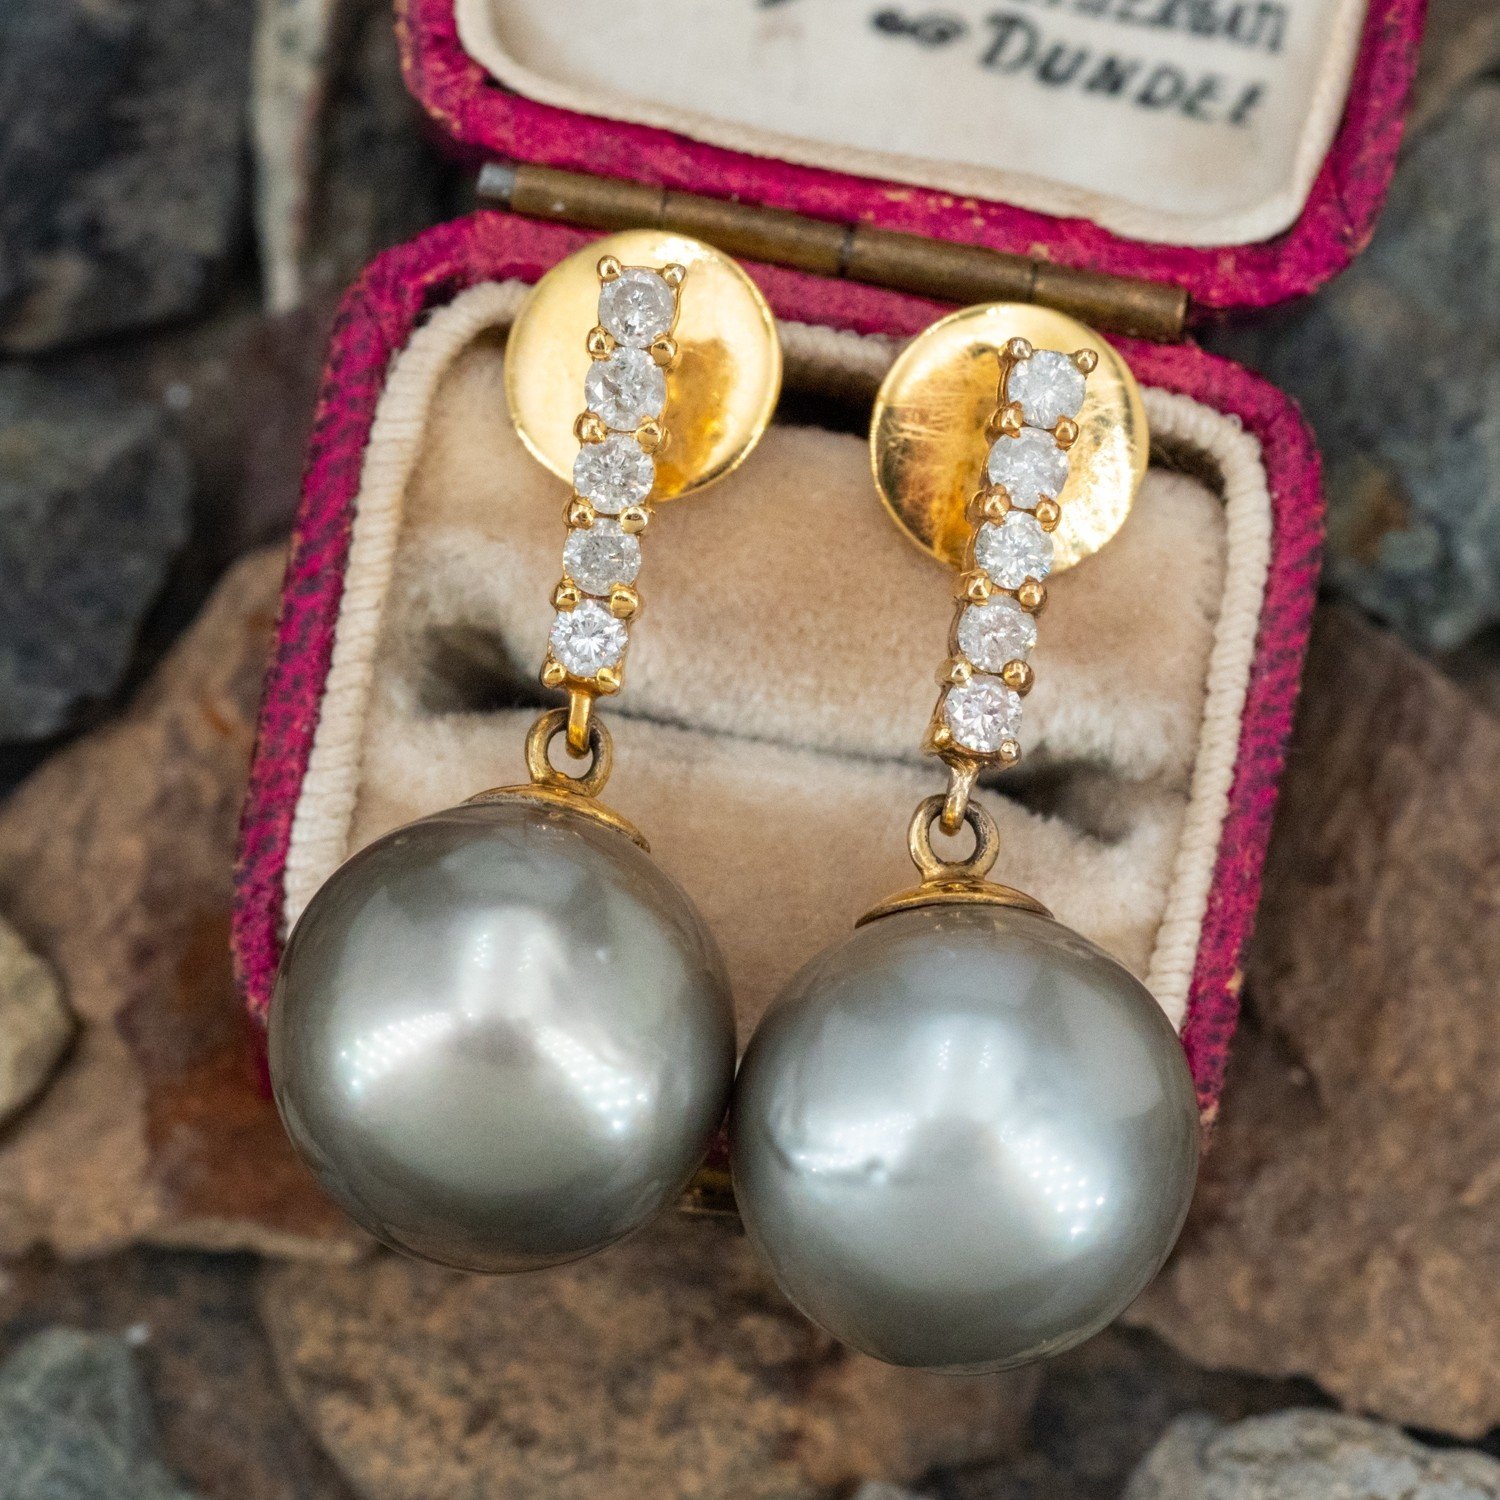 Pearl Drop and Diamond Stud Earrings | Kate Middleton's Jewelry